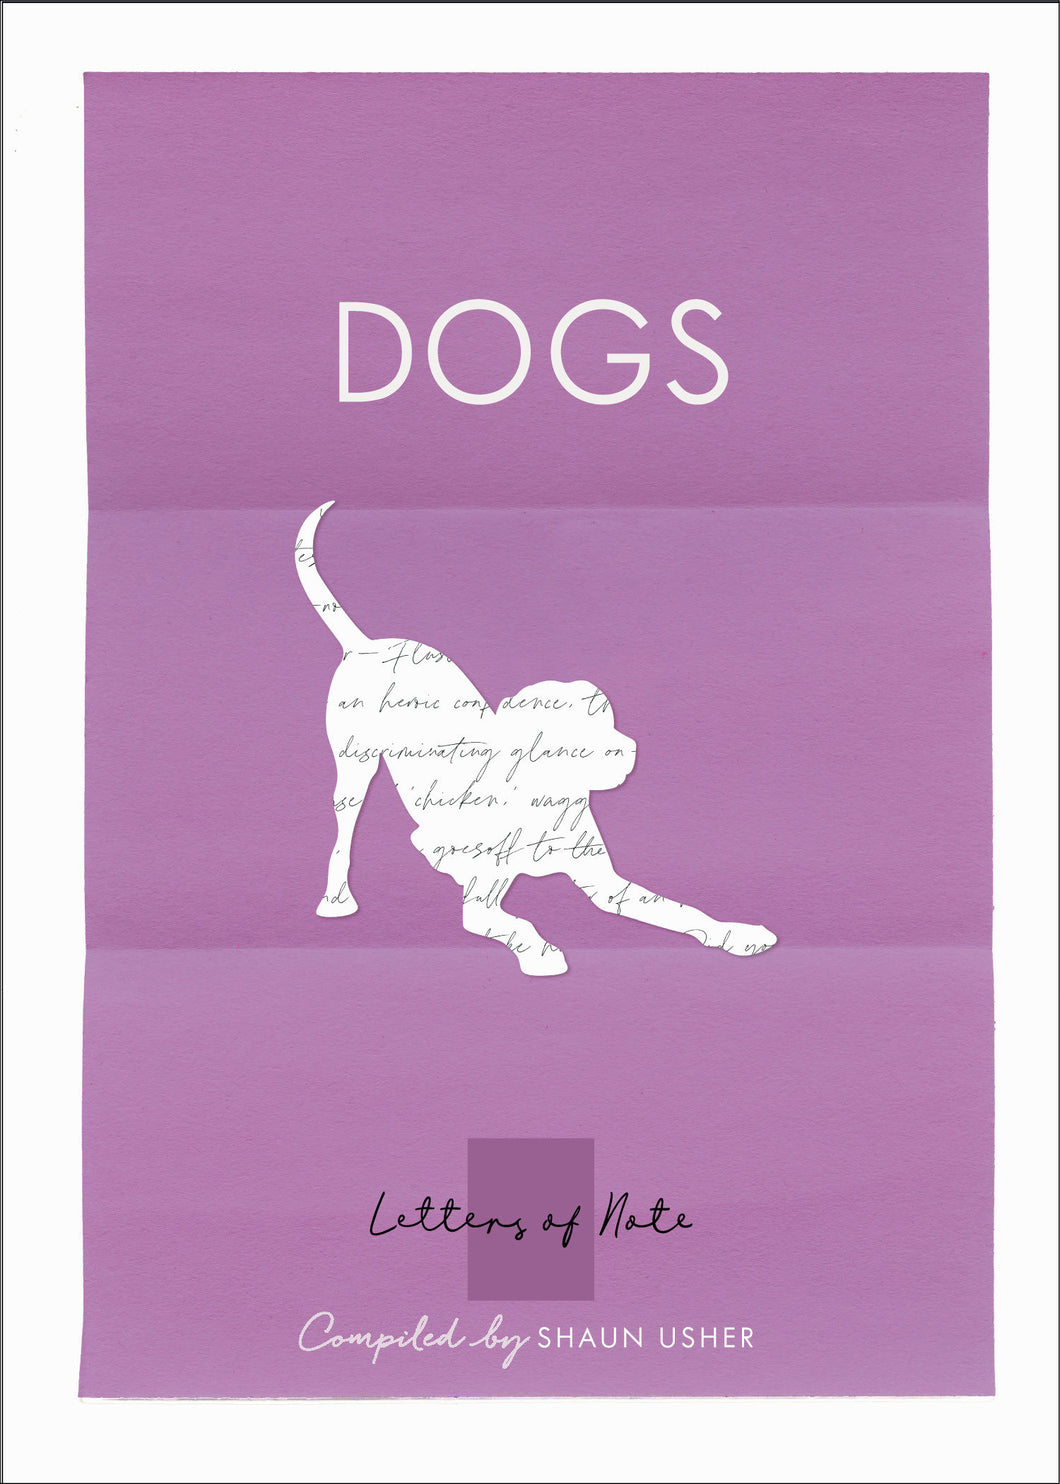 Letters of Note: Dogs